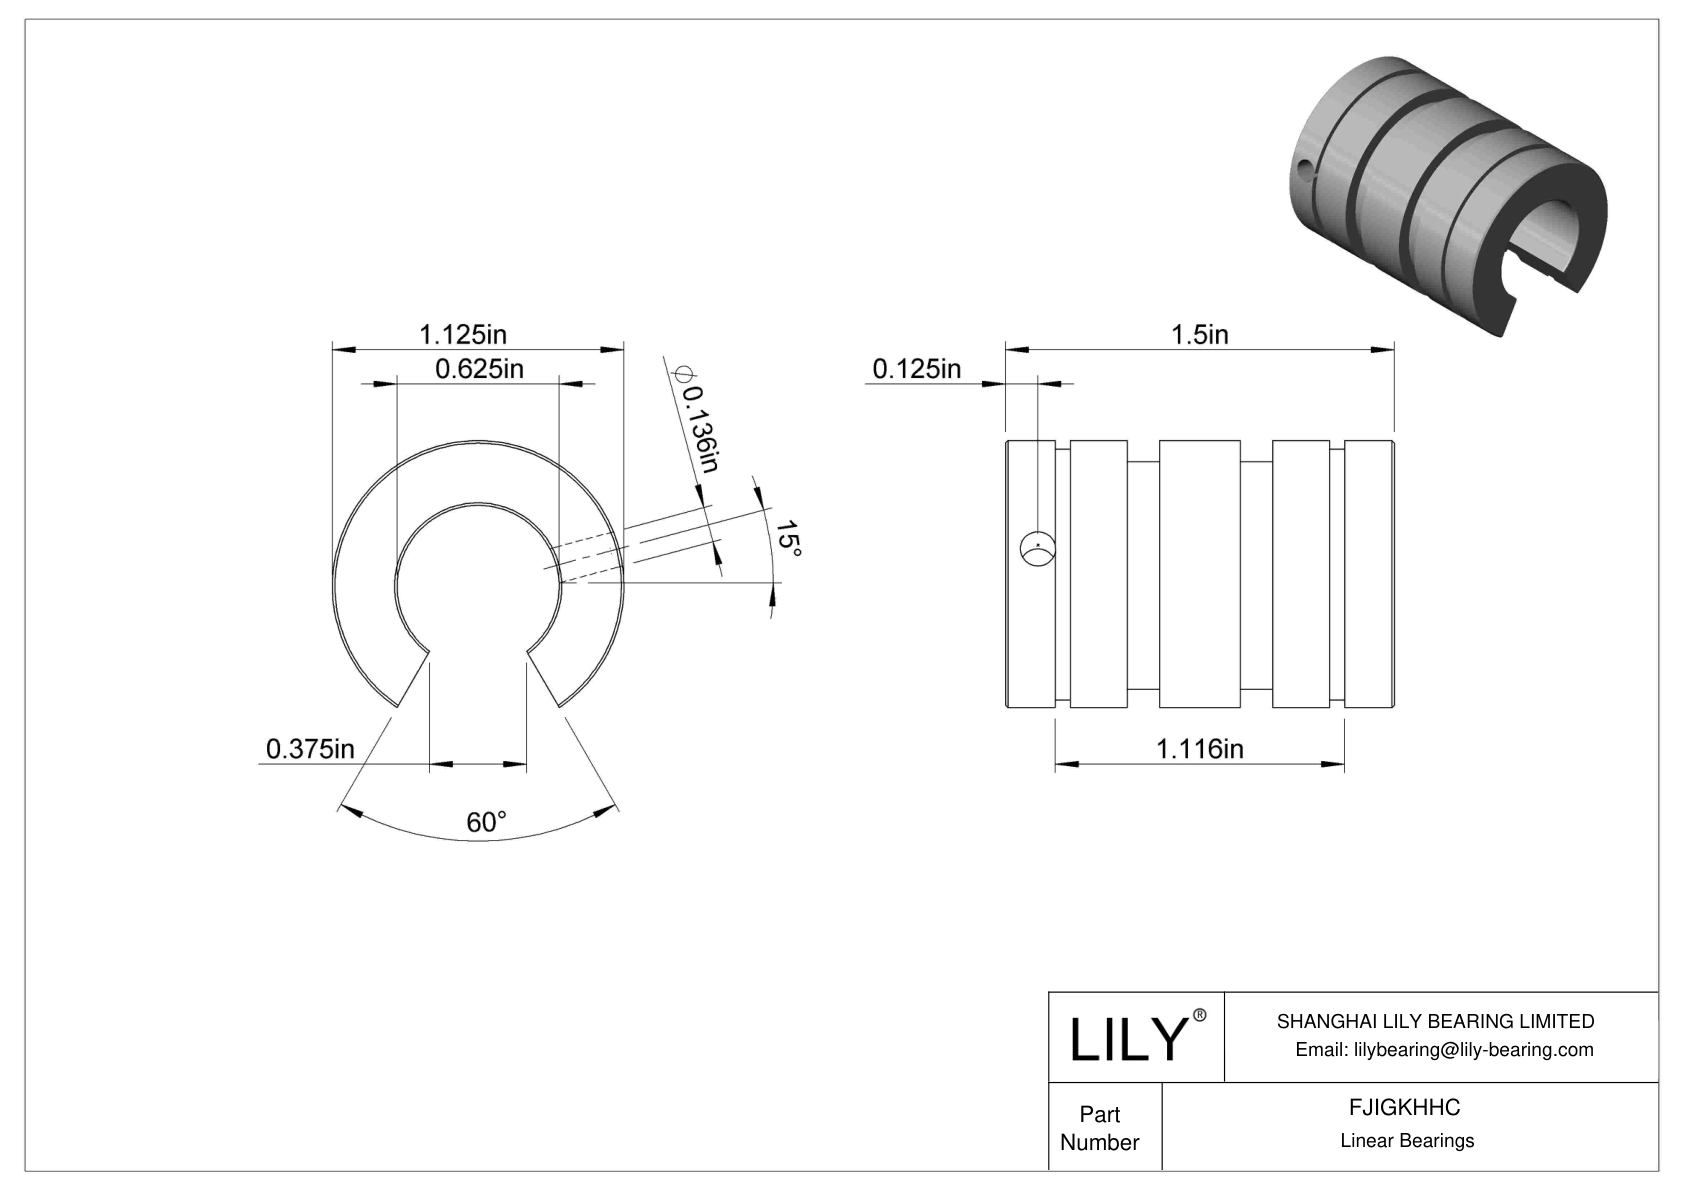 FJIGKHHC Common Linear Sleeve Bearings for Support Rail Shafts cad drawing